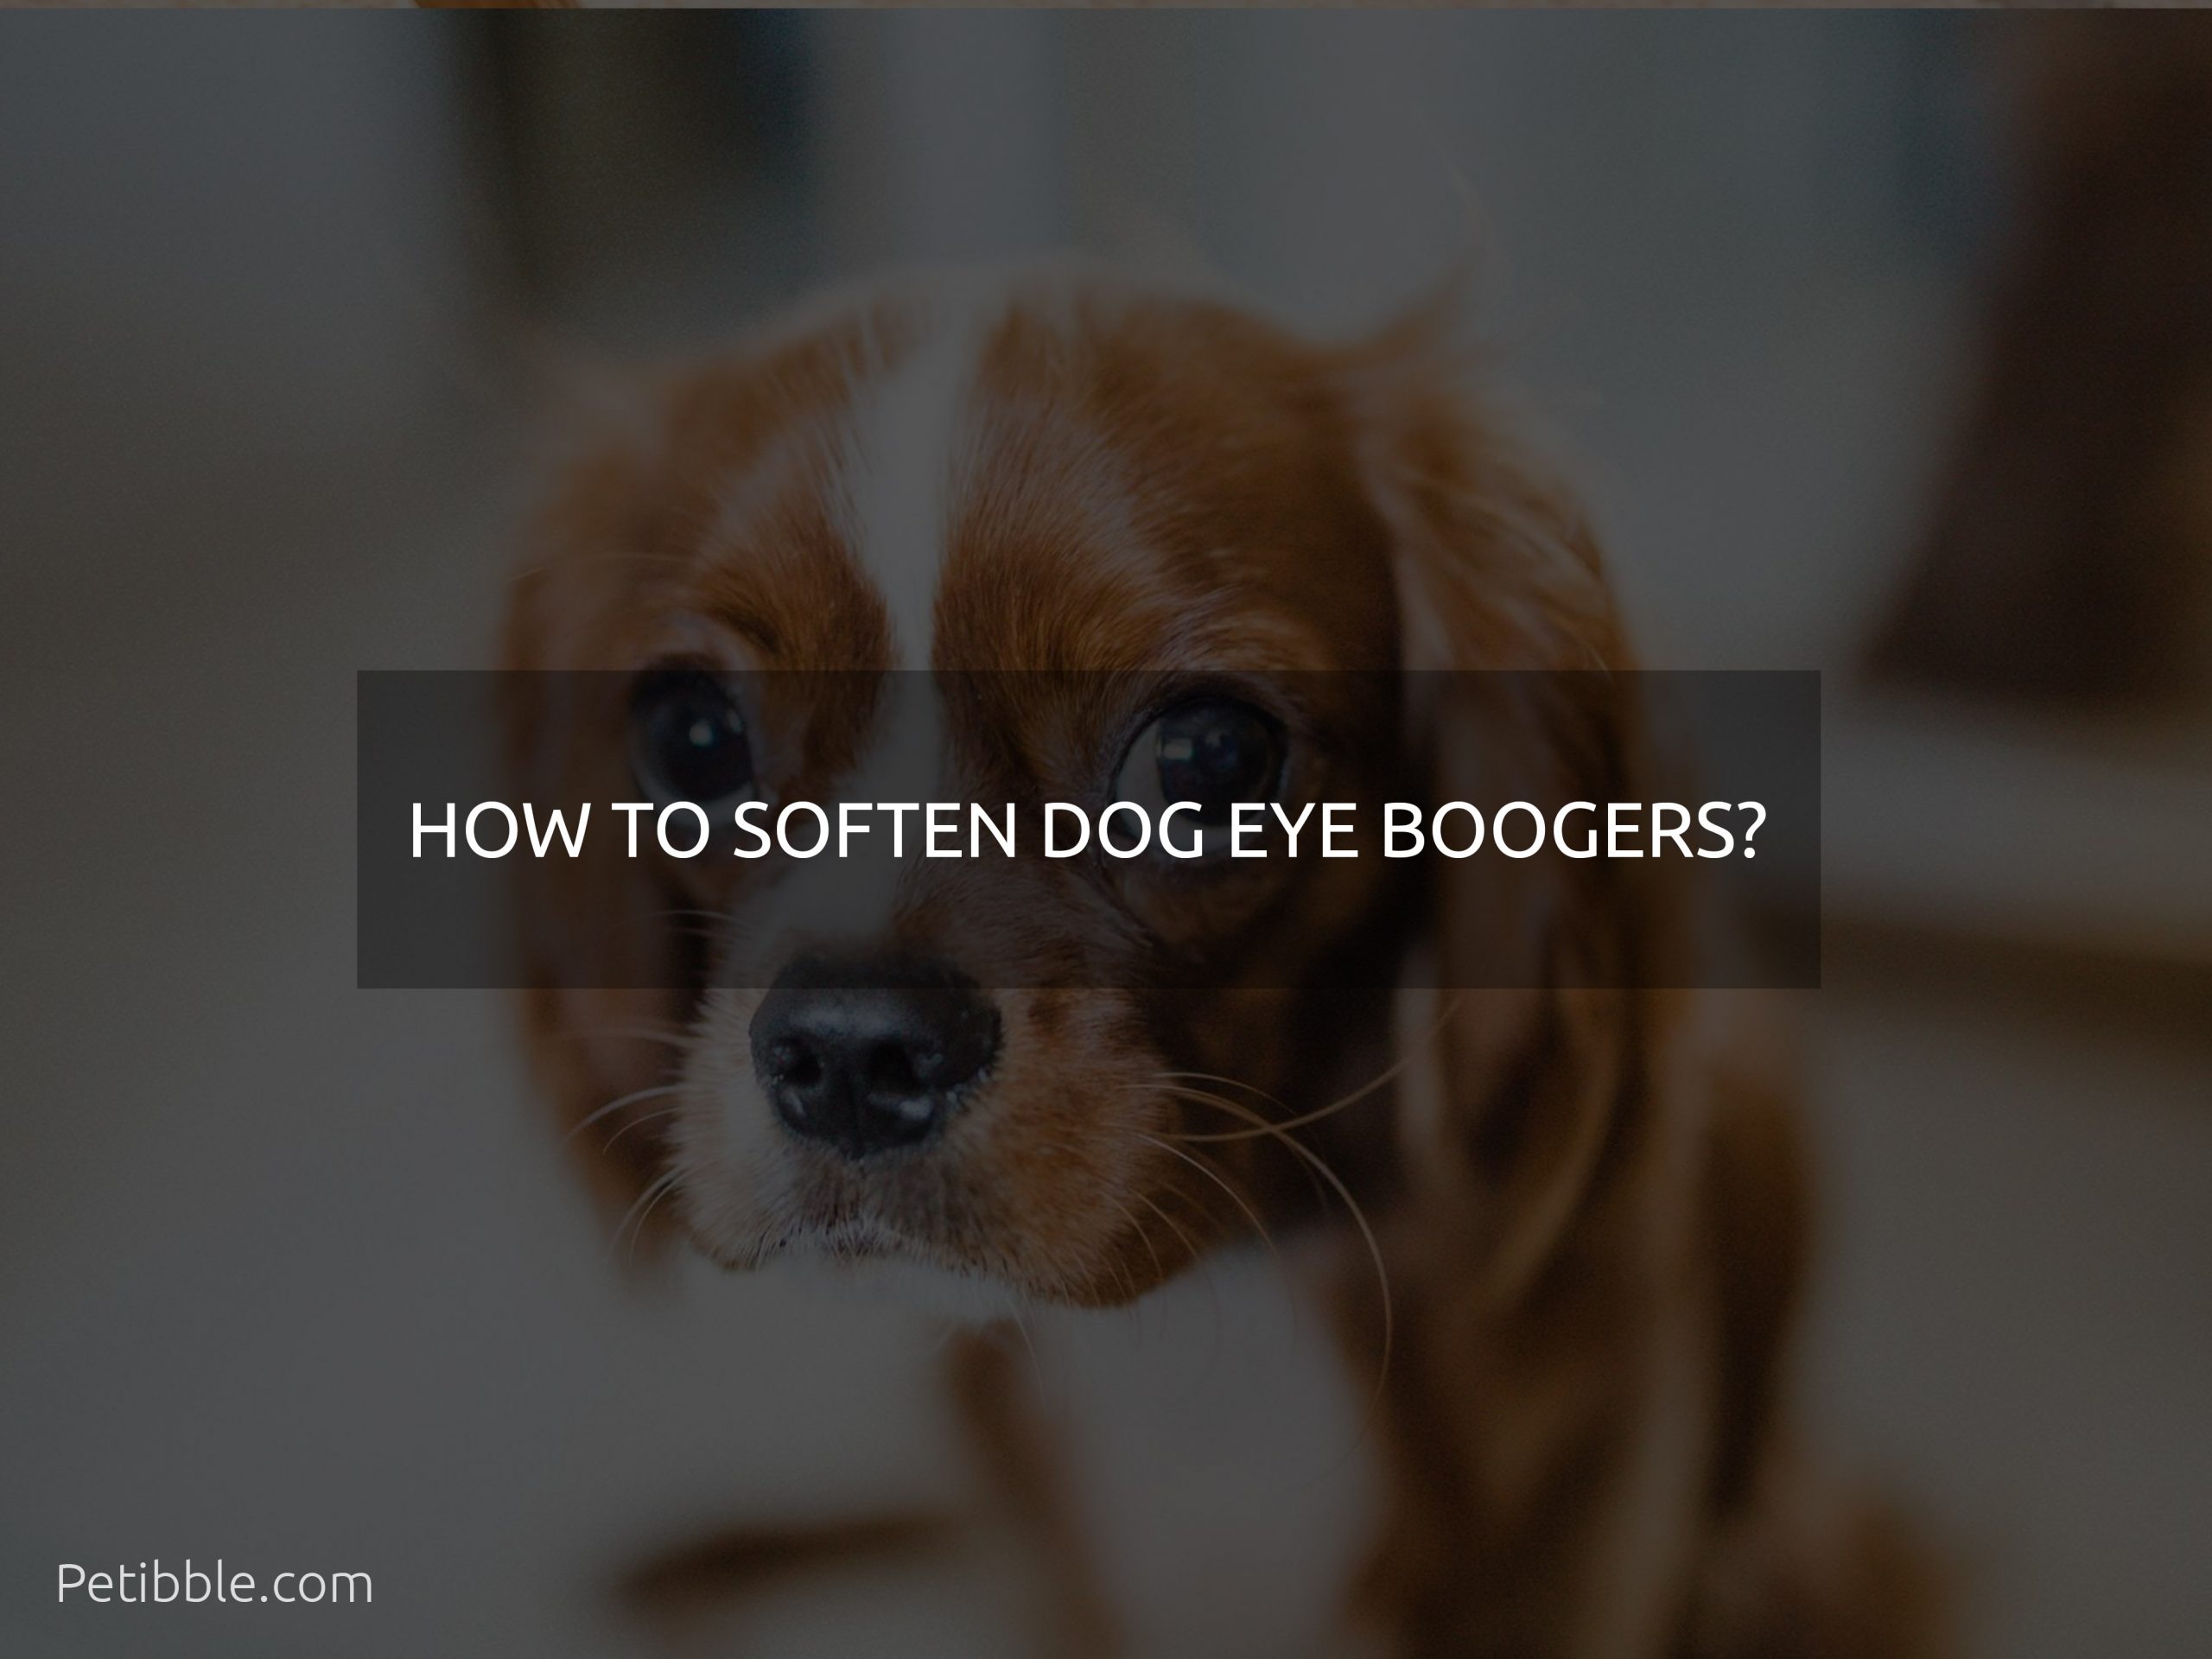 how to soften dog eye boogers?